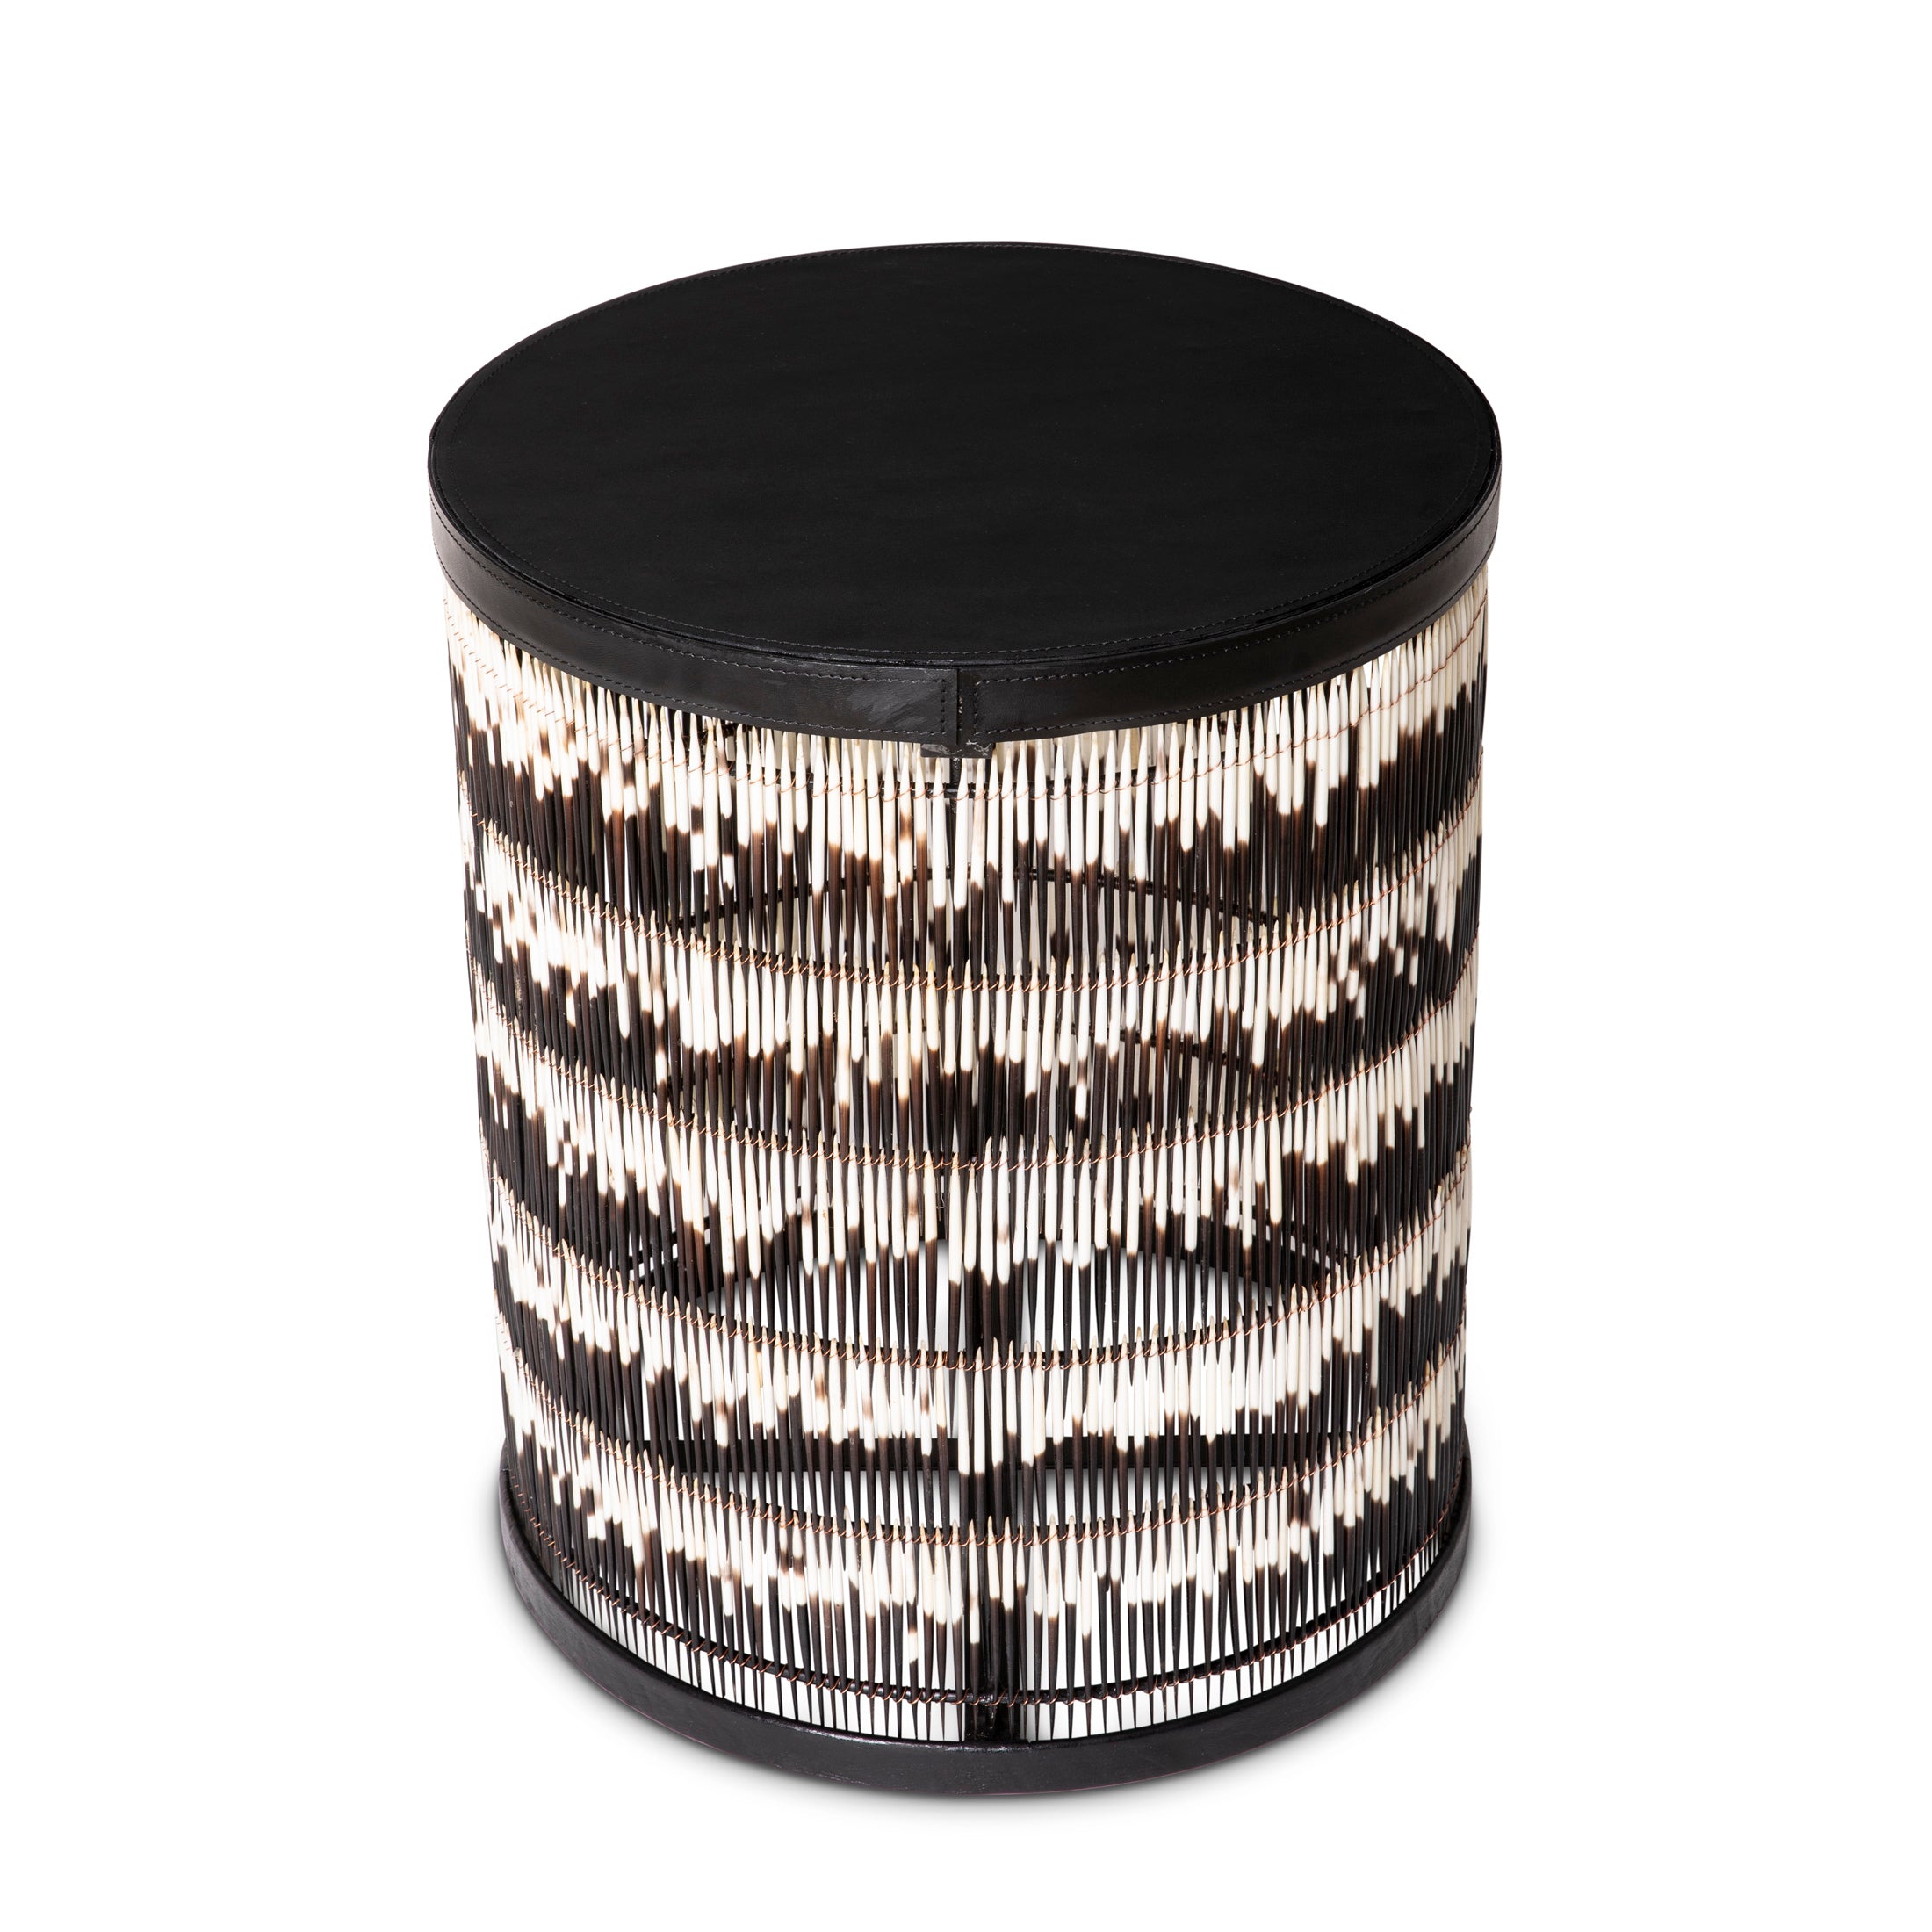 Porcupine Quill Cylinder Side Table